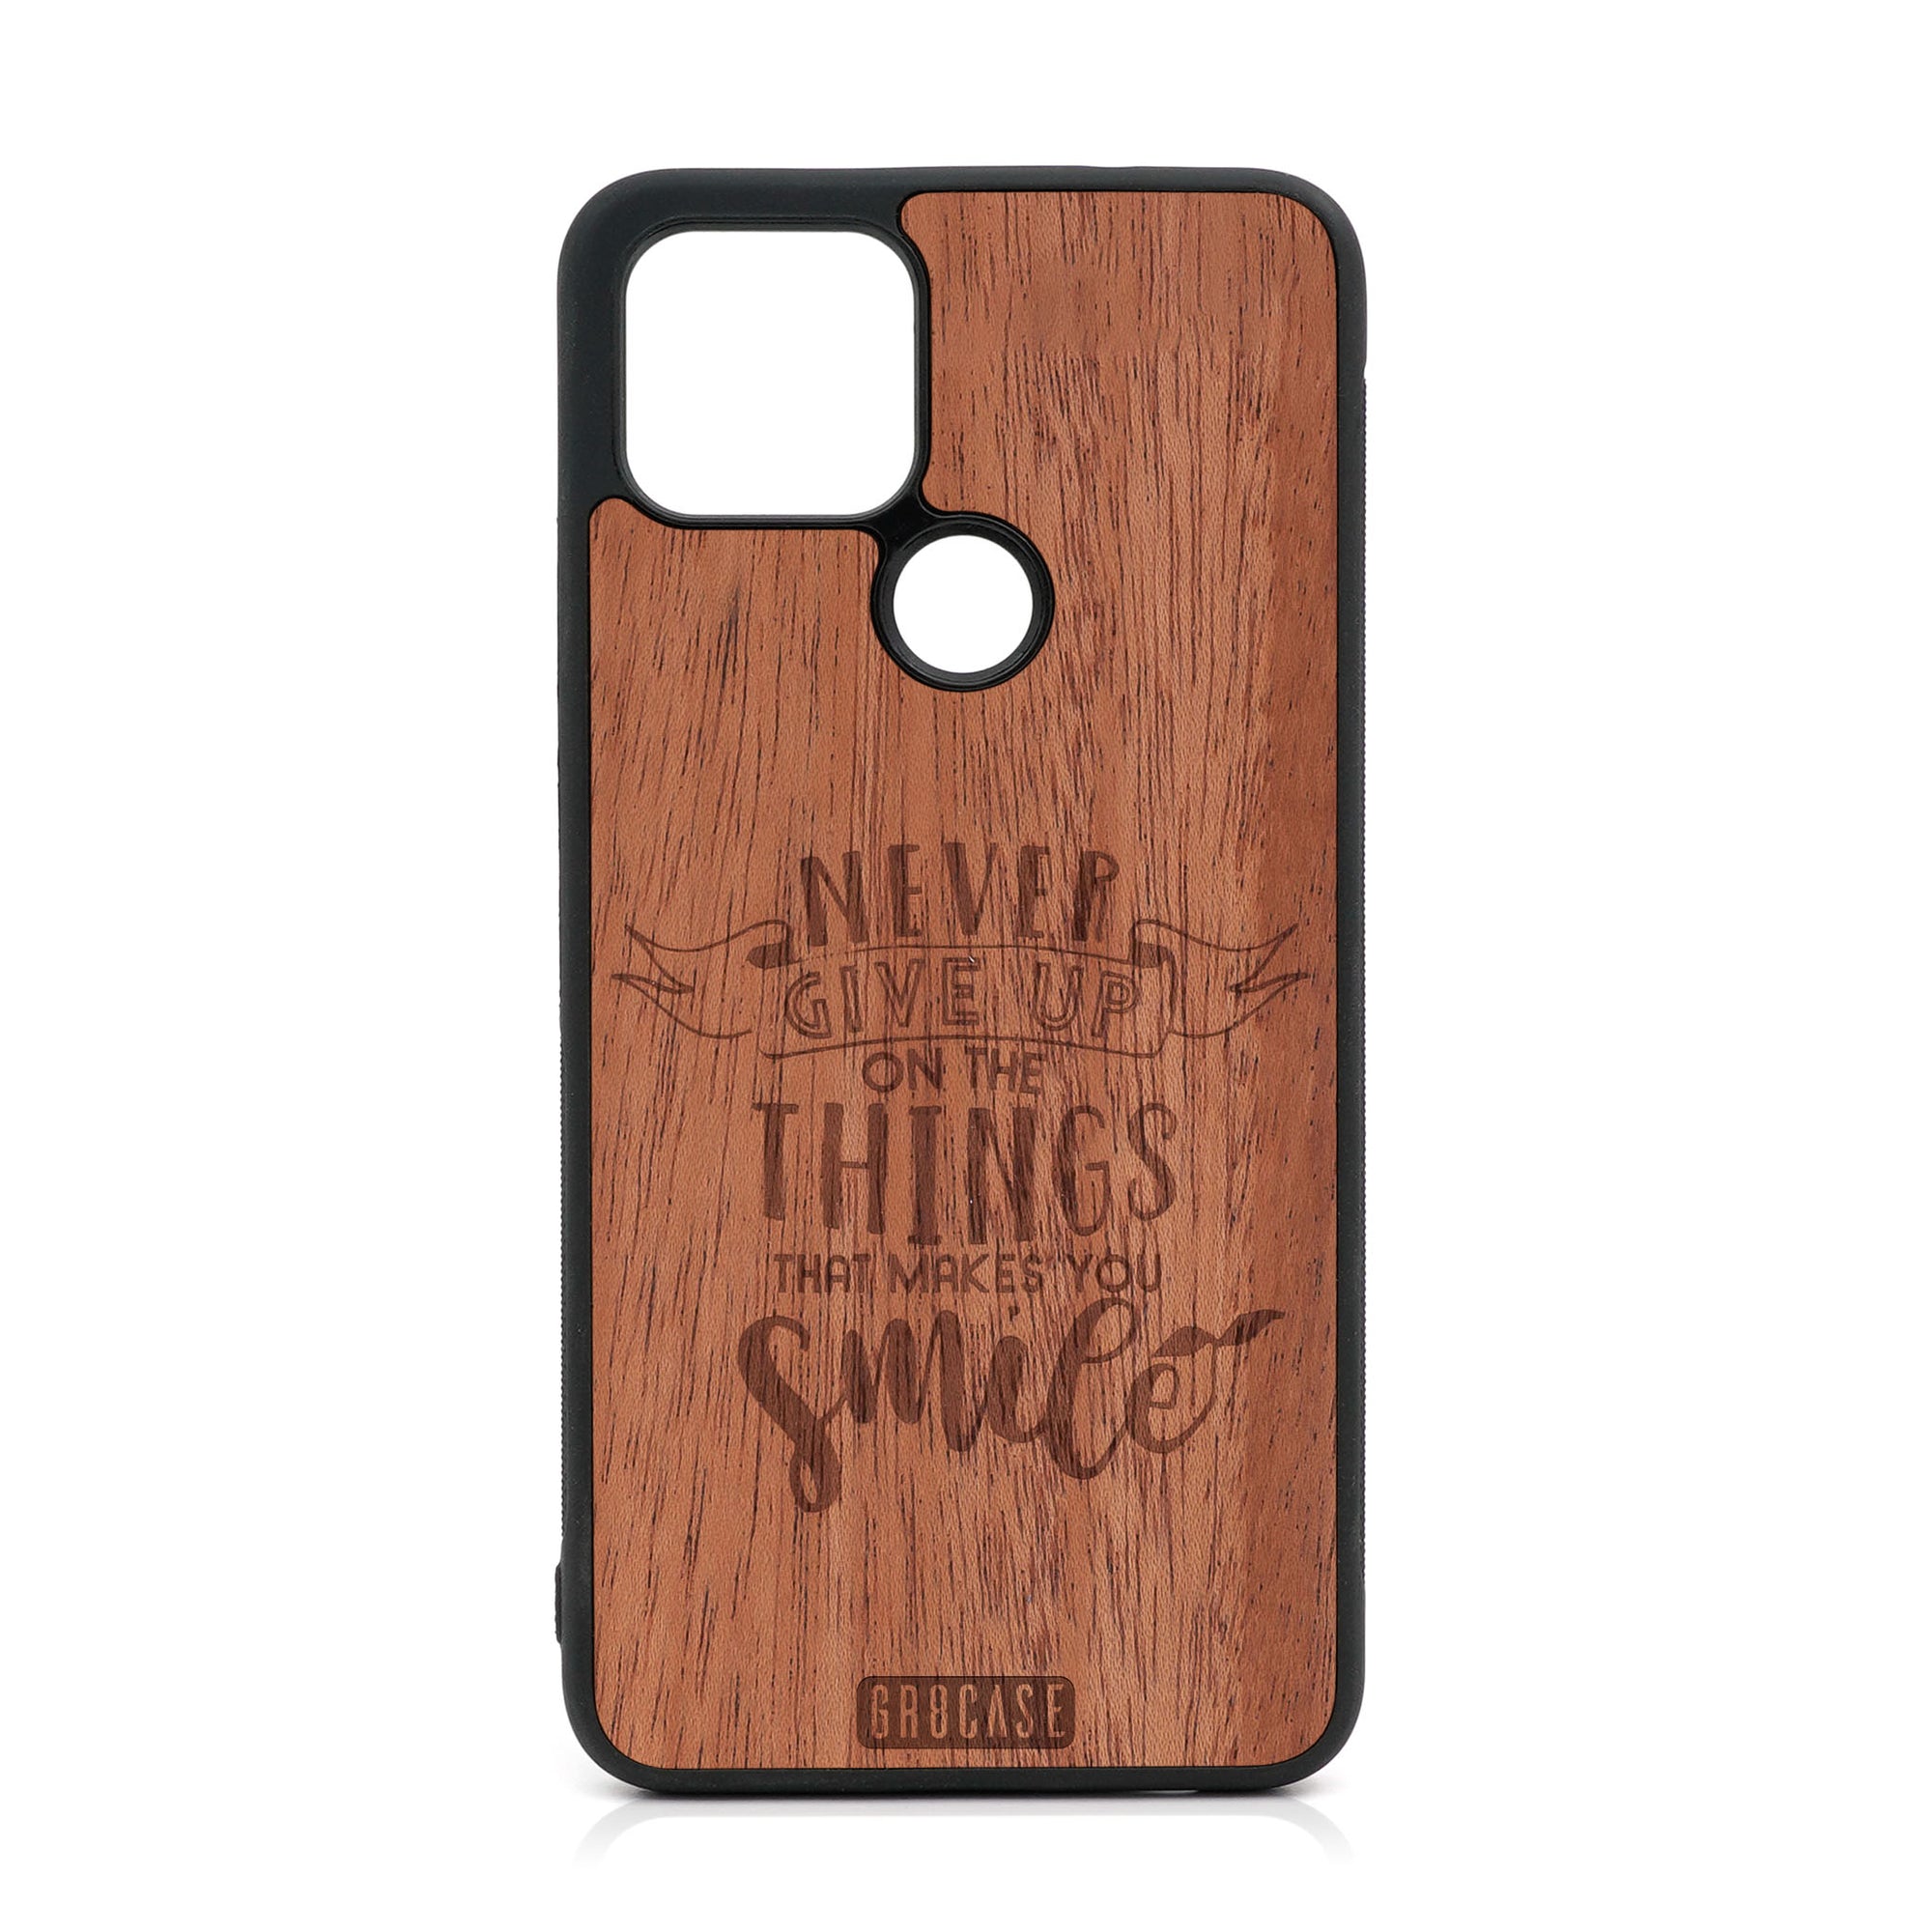 Never Give Up On The Things That Make You Smile Design Wood Case For Google Pixel 5 XL/4A 5G